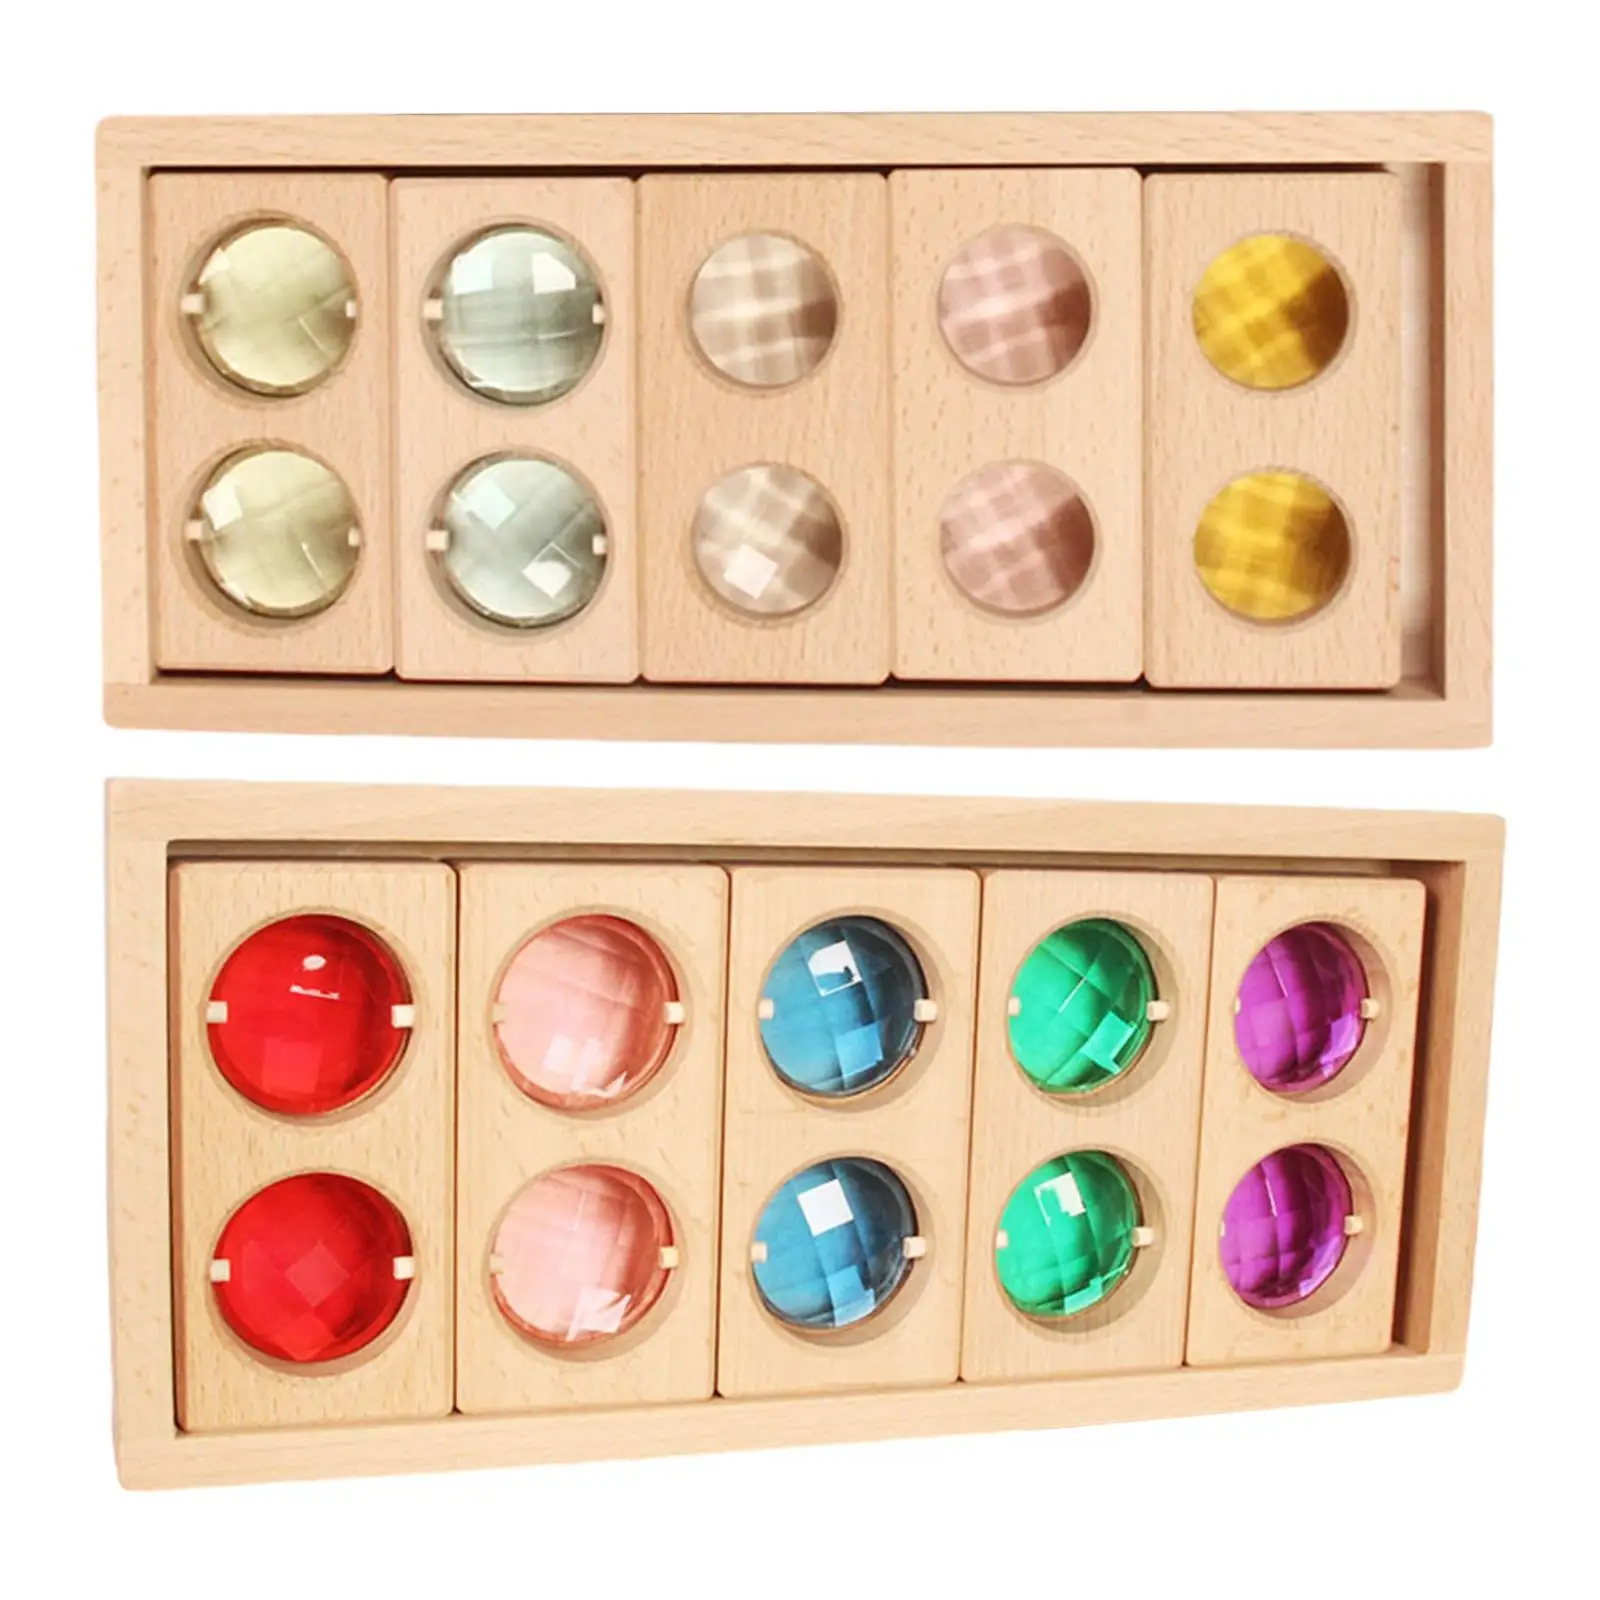 Wooden Toy Colorful Rainbow Gemstone Blocks for Developing Color Perception